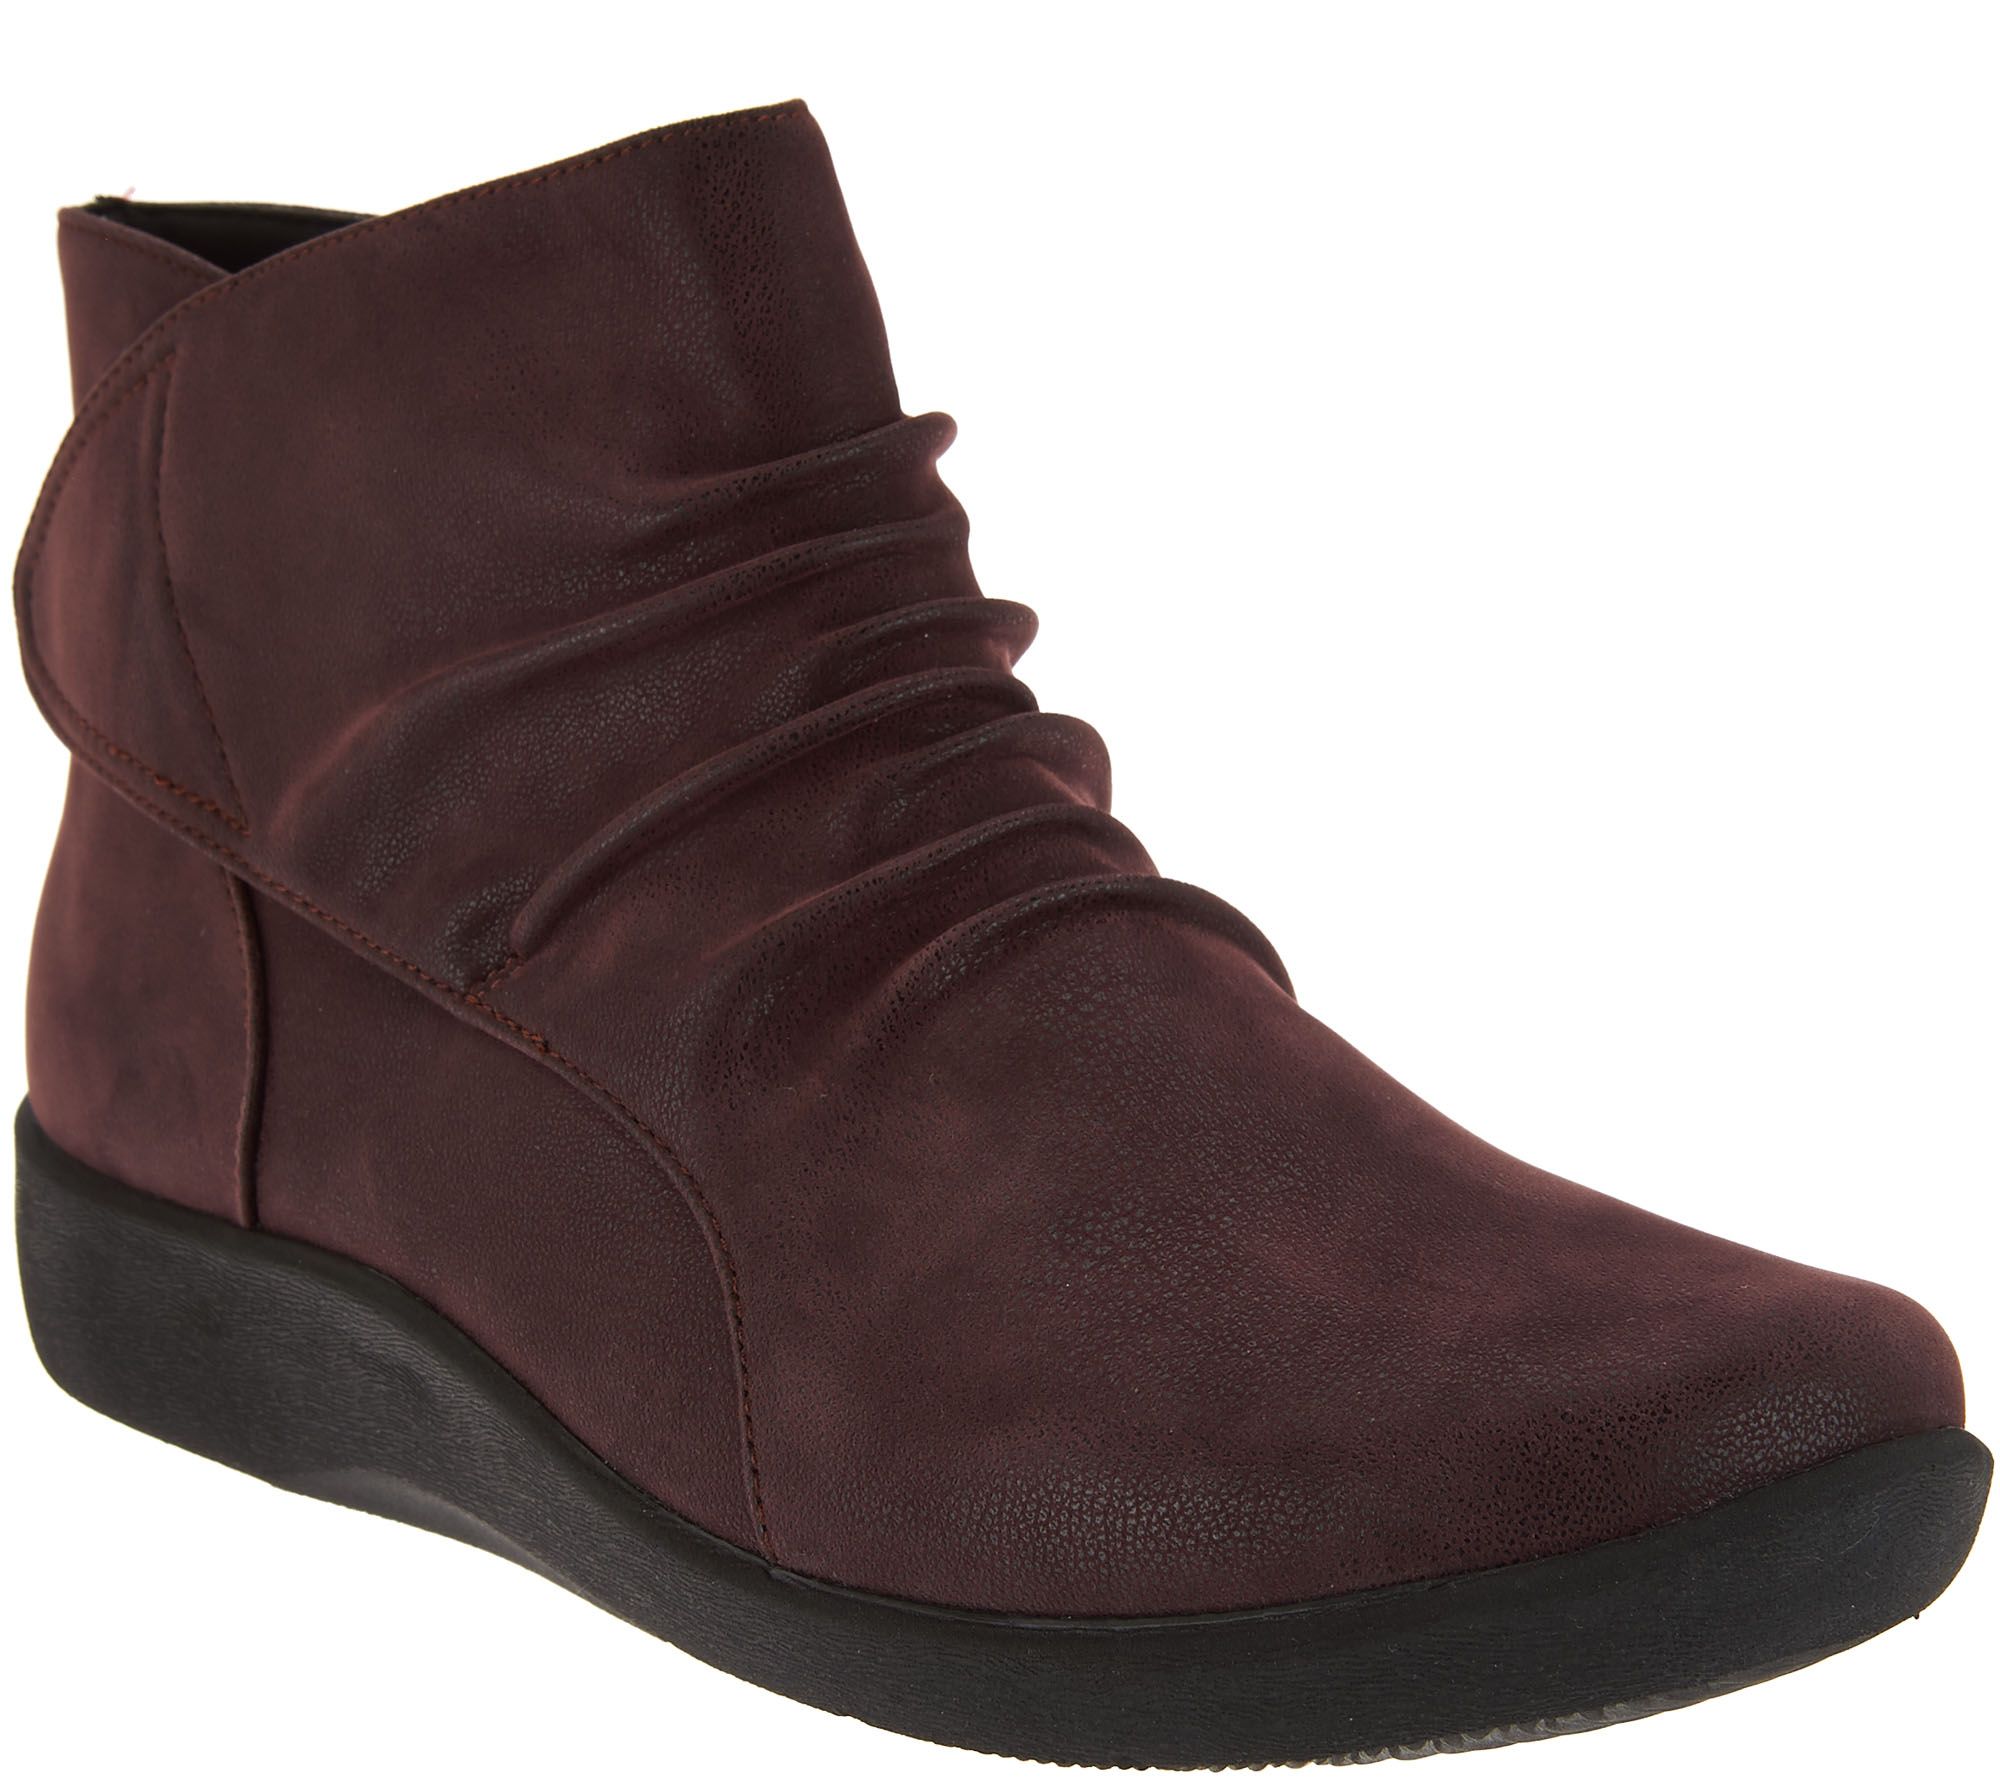 CLOUDSTEPPERS by Clarks Ruched Ankle Boots - Sillian Sway - QVC.com